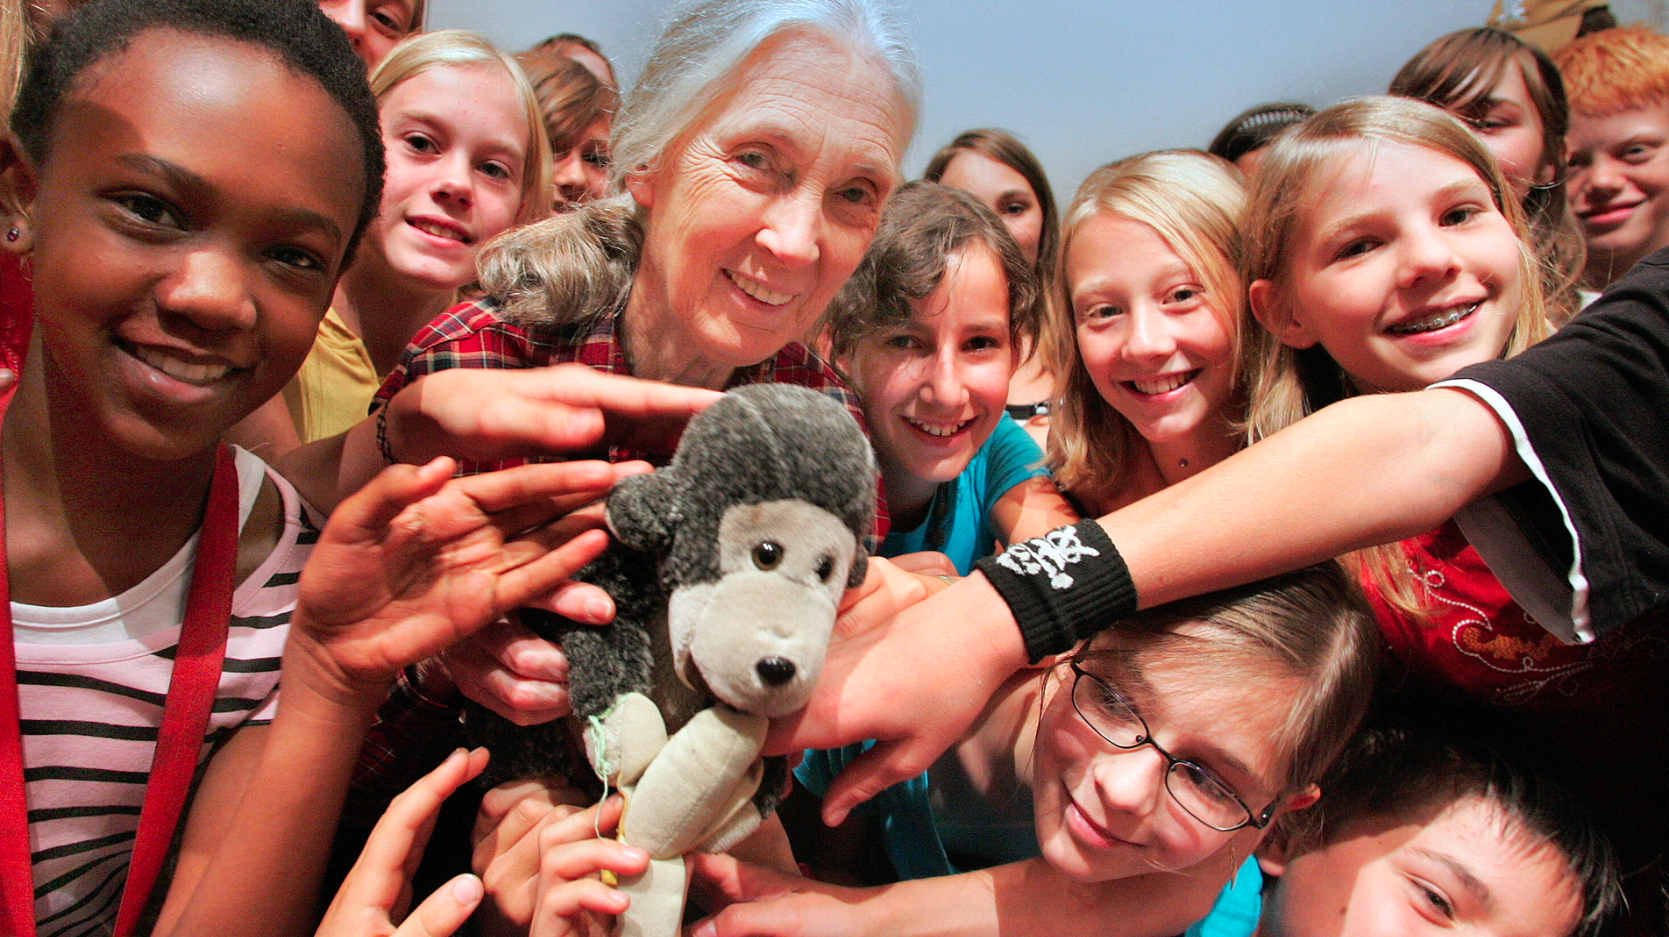 Happy birthday Jane Goodall!  5 fun, easy ways to introduce her to your kids